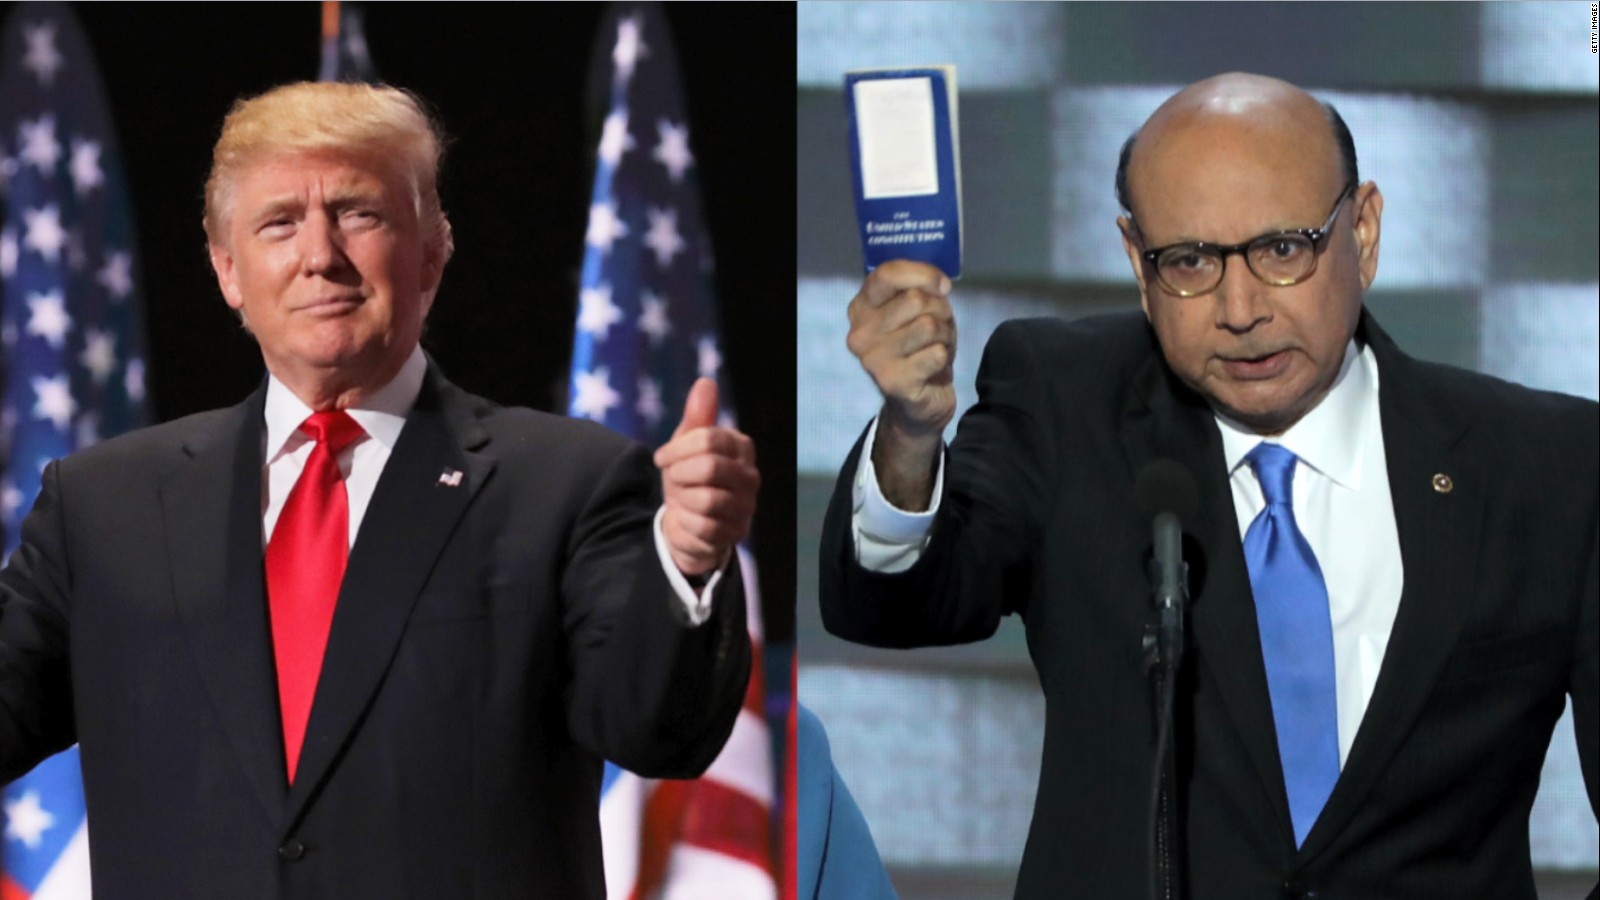 Donald Trump claims Humayun Khan would still be alive if he were president